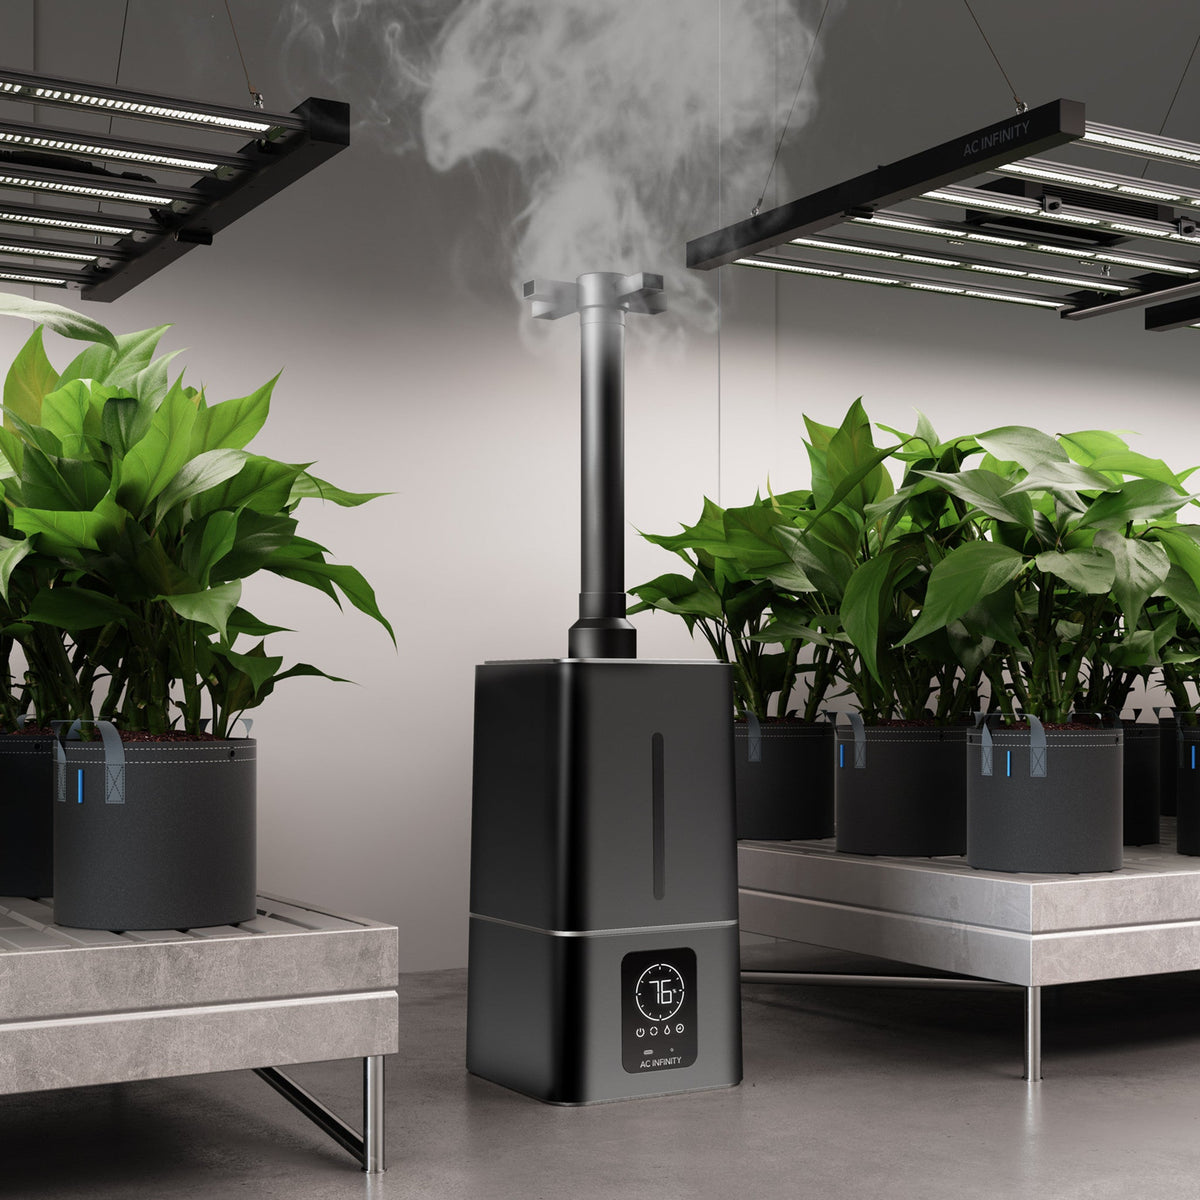 AC Infinity AC Infinity Cloudforge T7, Environmental Plant Humidifier